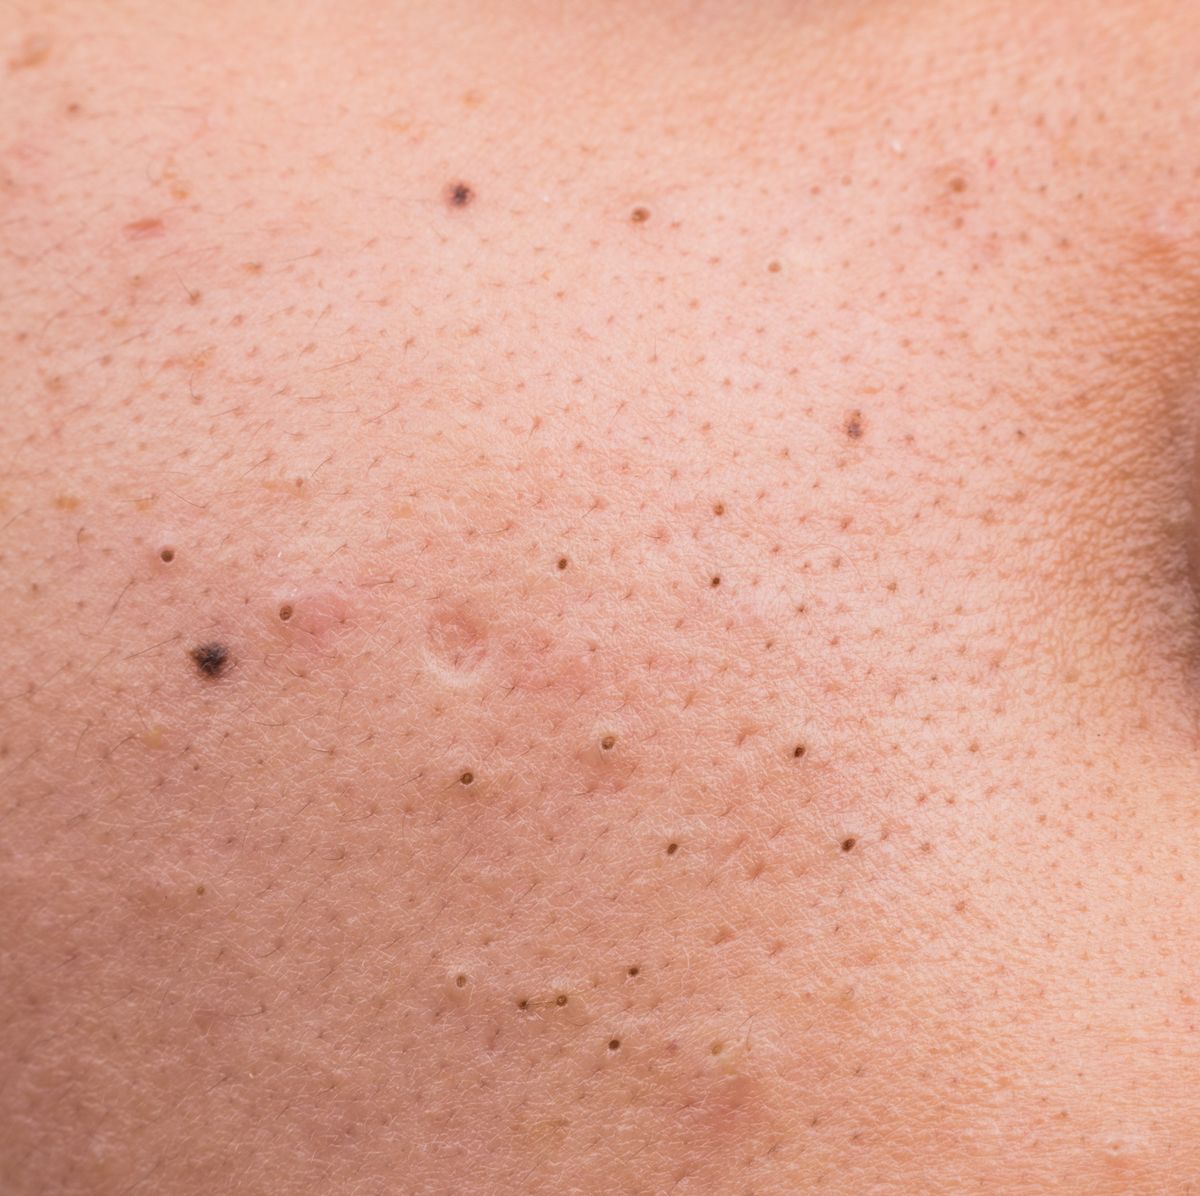 How to Get Rid of Blackheads: Symptoms, Causes and Treatments